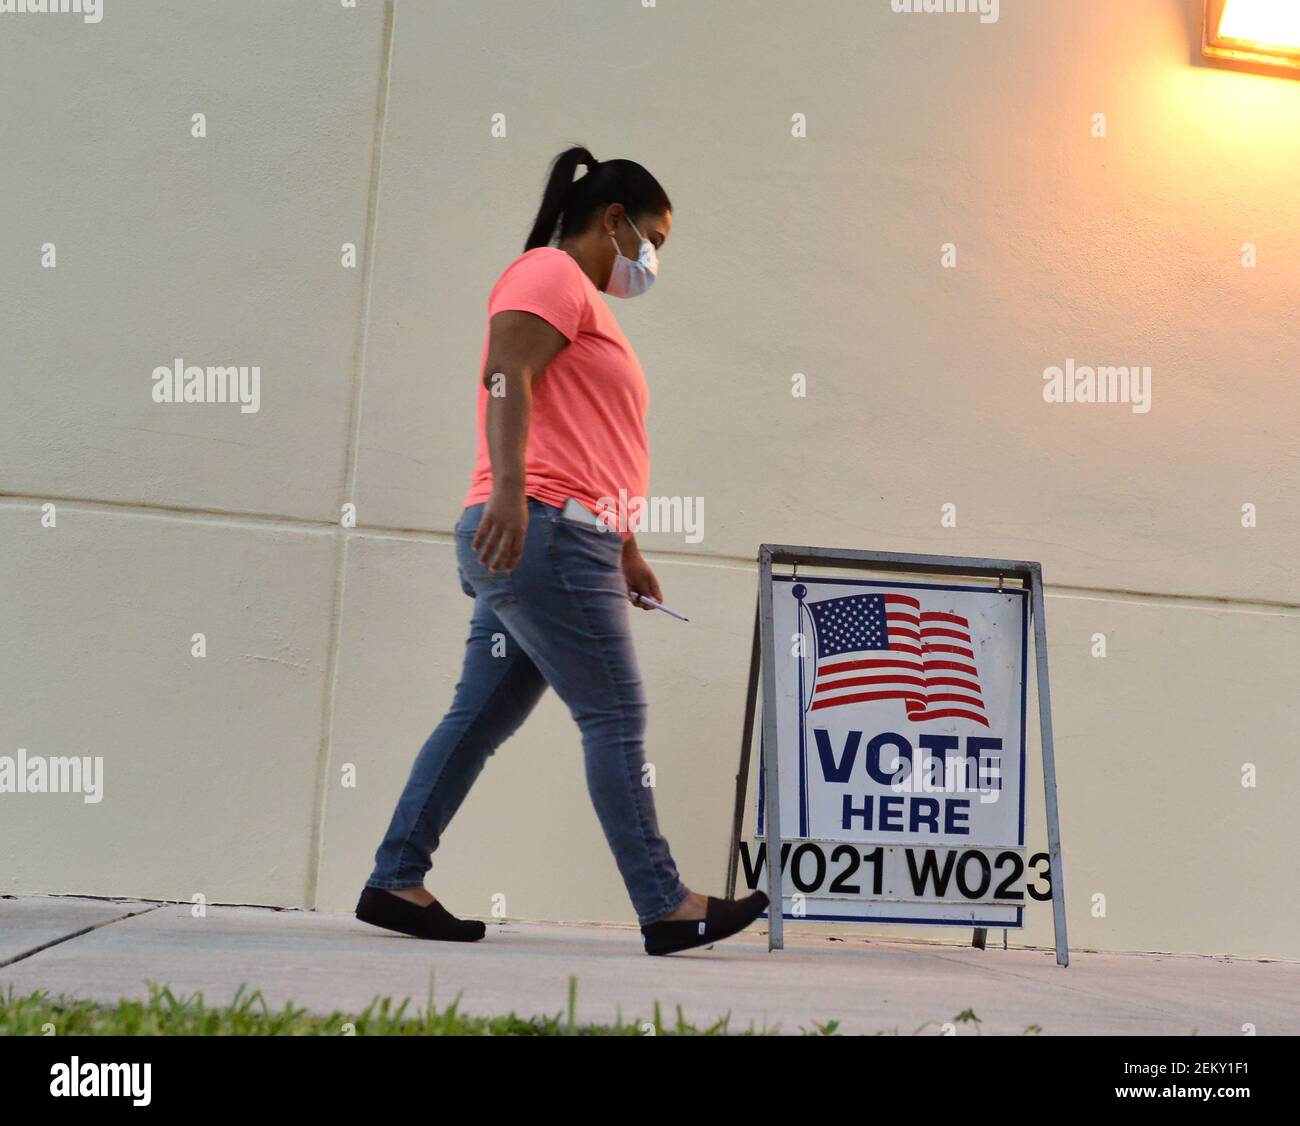 Voters head to the polls to cast their ballots on election day on November 3, 2020 in Broward County, Miramar, Florida. Americans are voting on Election Day to choose between re-electing Donald J. Trump or electing Joe Biden as the 46th President of the United States to serve for a second term from 2021 through 2024. (Photo by JL/Sipa USA) Stock Photo